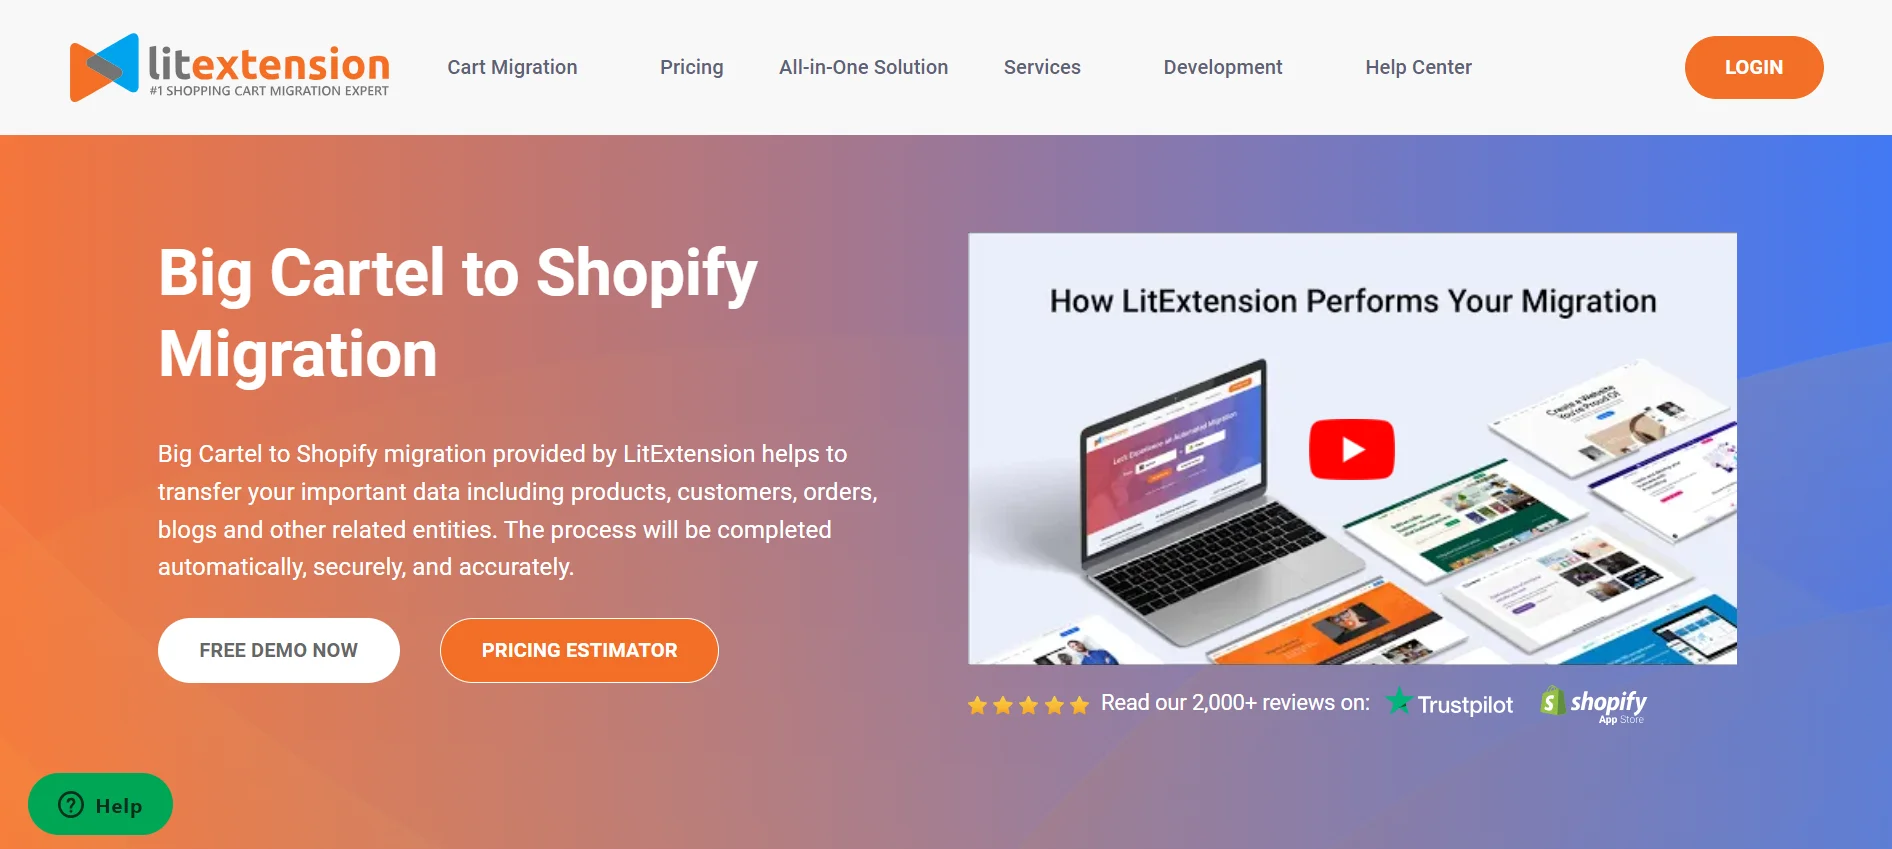 Big Cartel to Shopify migration with LitExtension